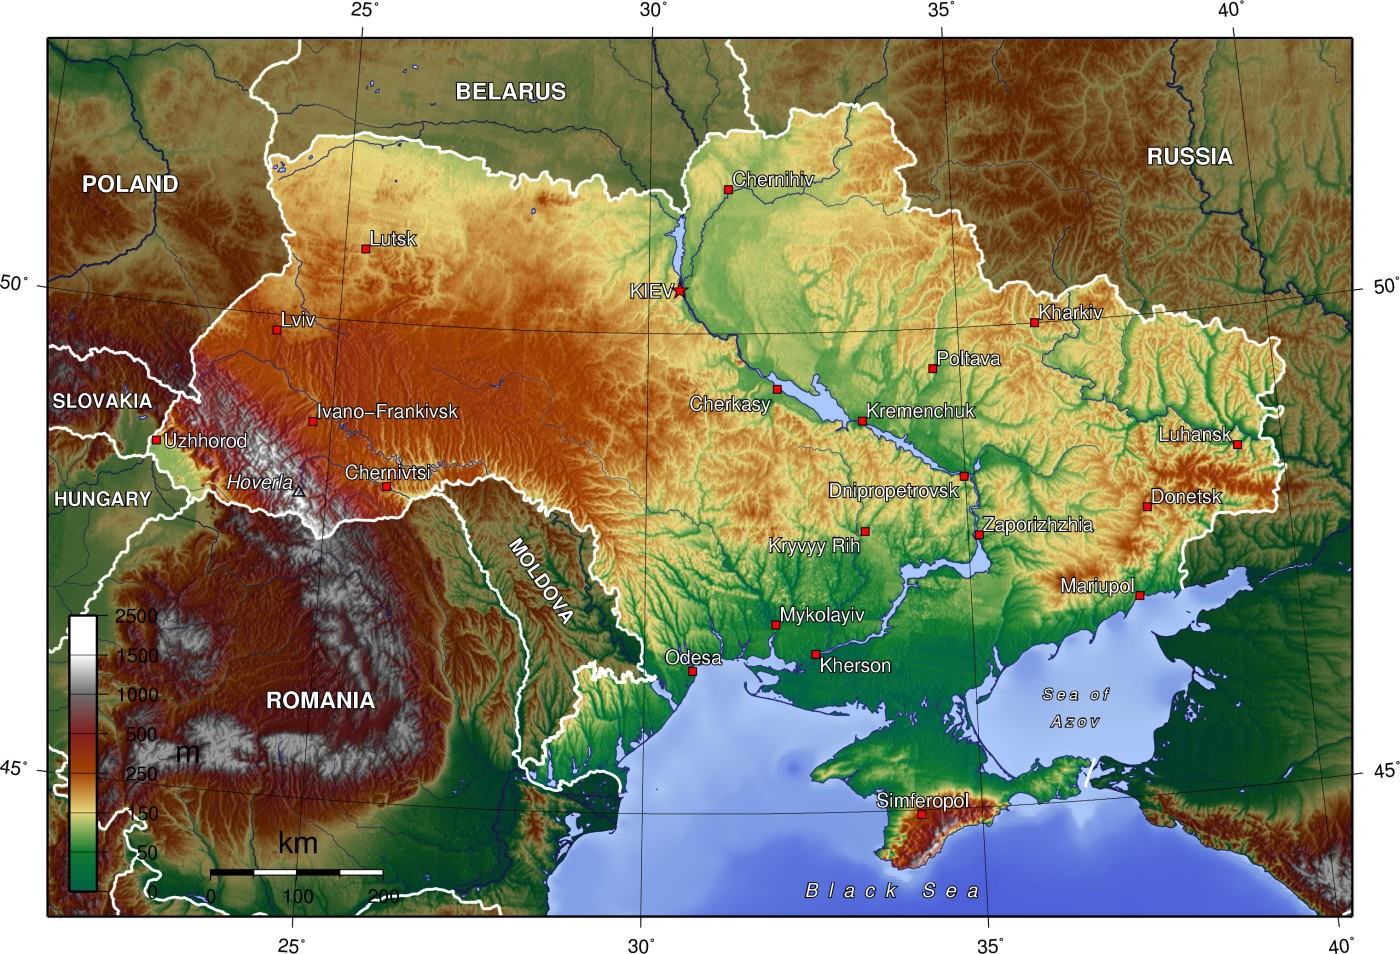 Relief Map of Ukraine. Map Credit: Wikimedia Commons